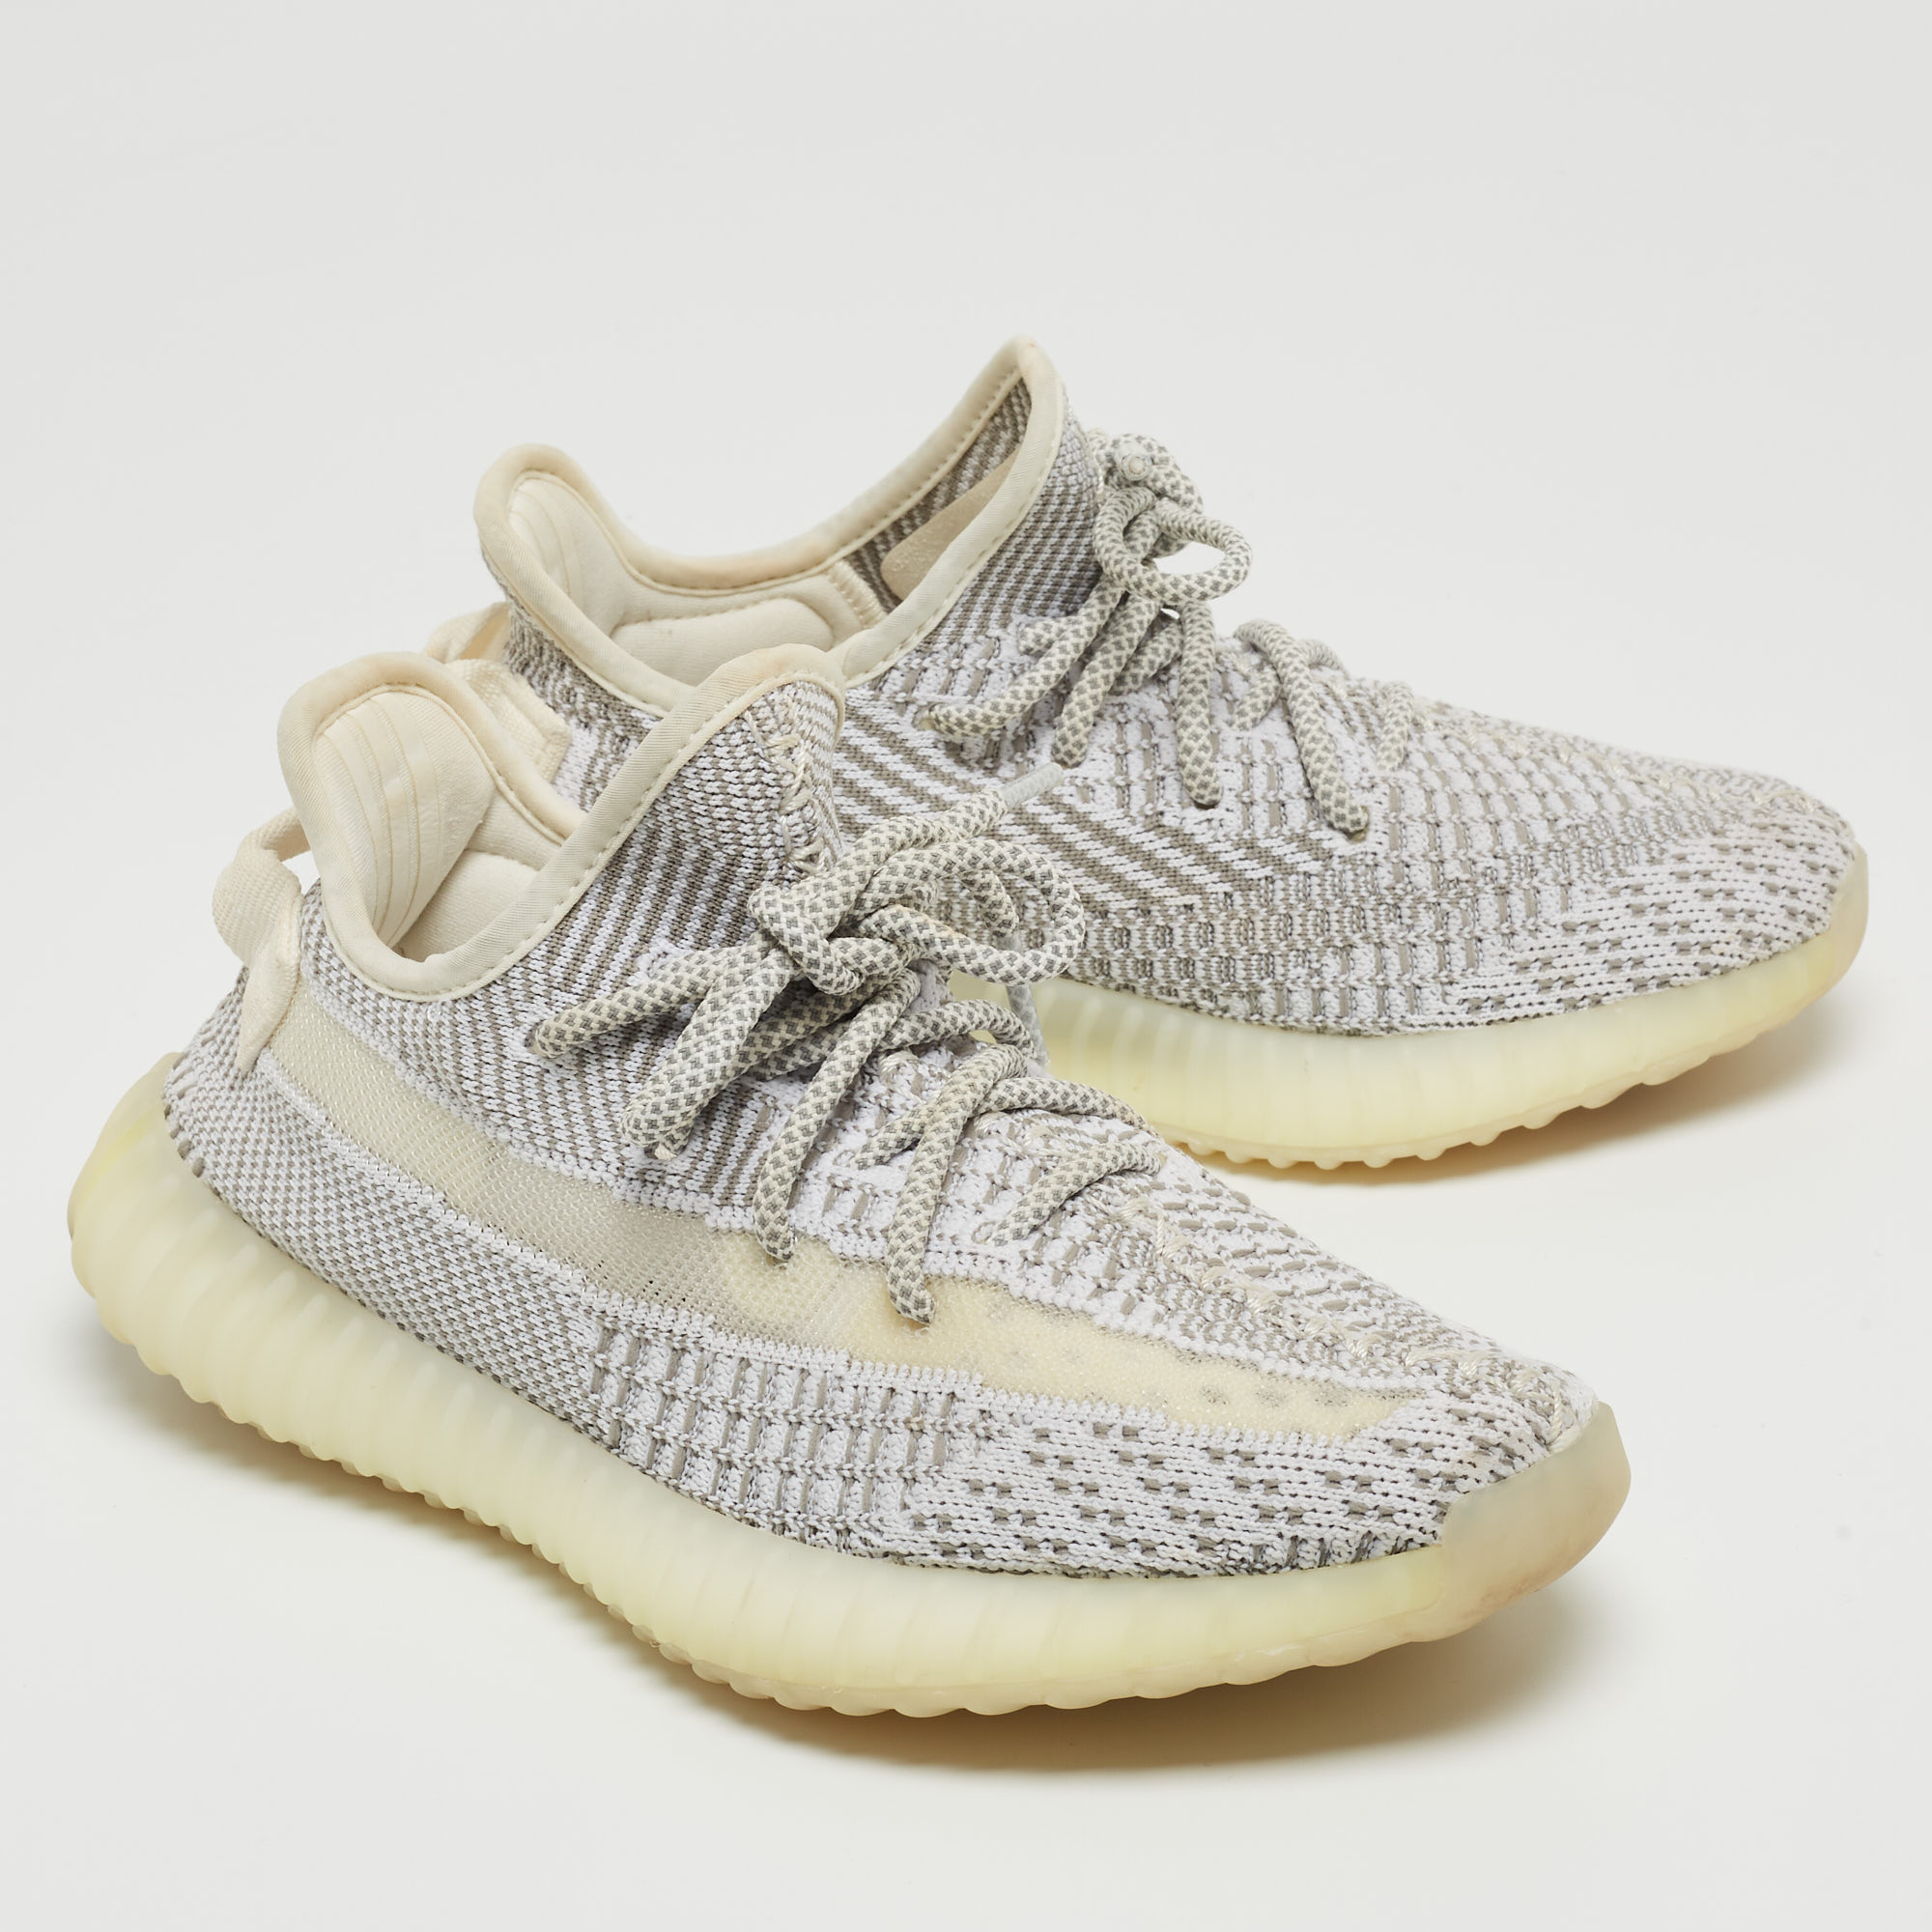 Yeezy X Adidas Two Tone Knit Fabric Boost 350 V2 Static Sneakers Size 37 1/3